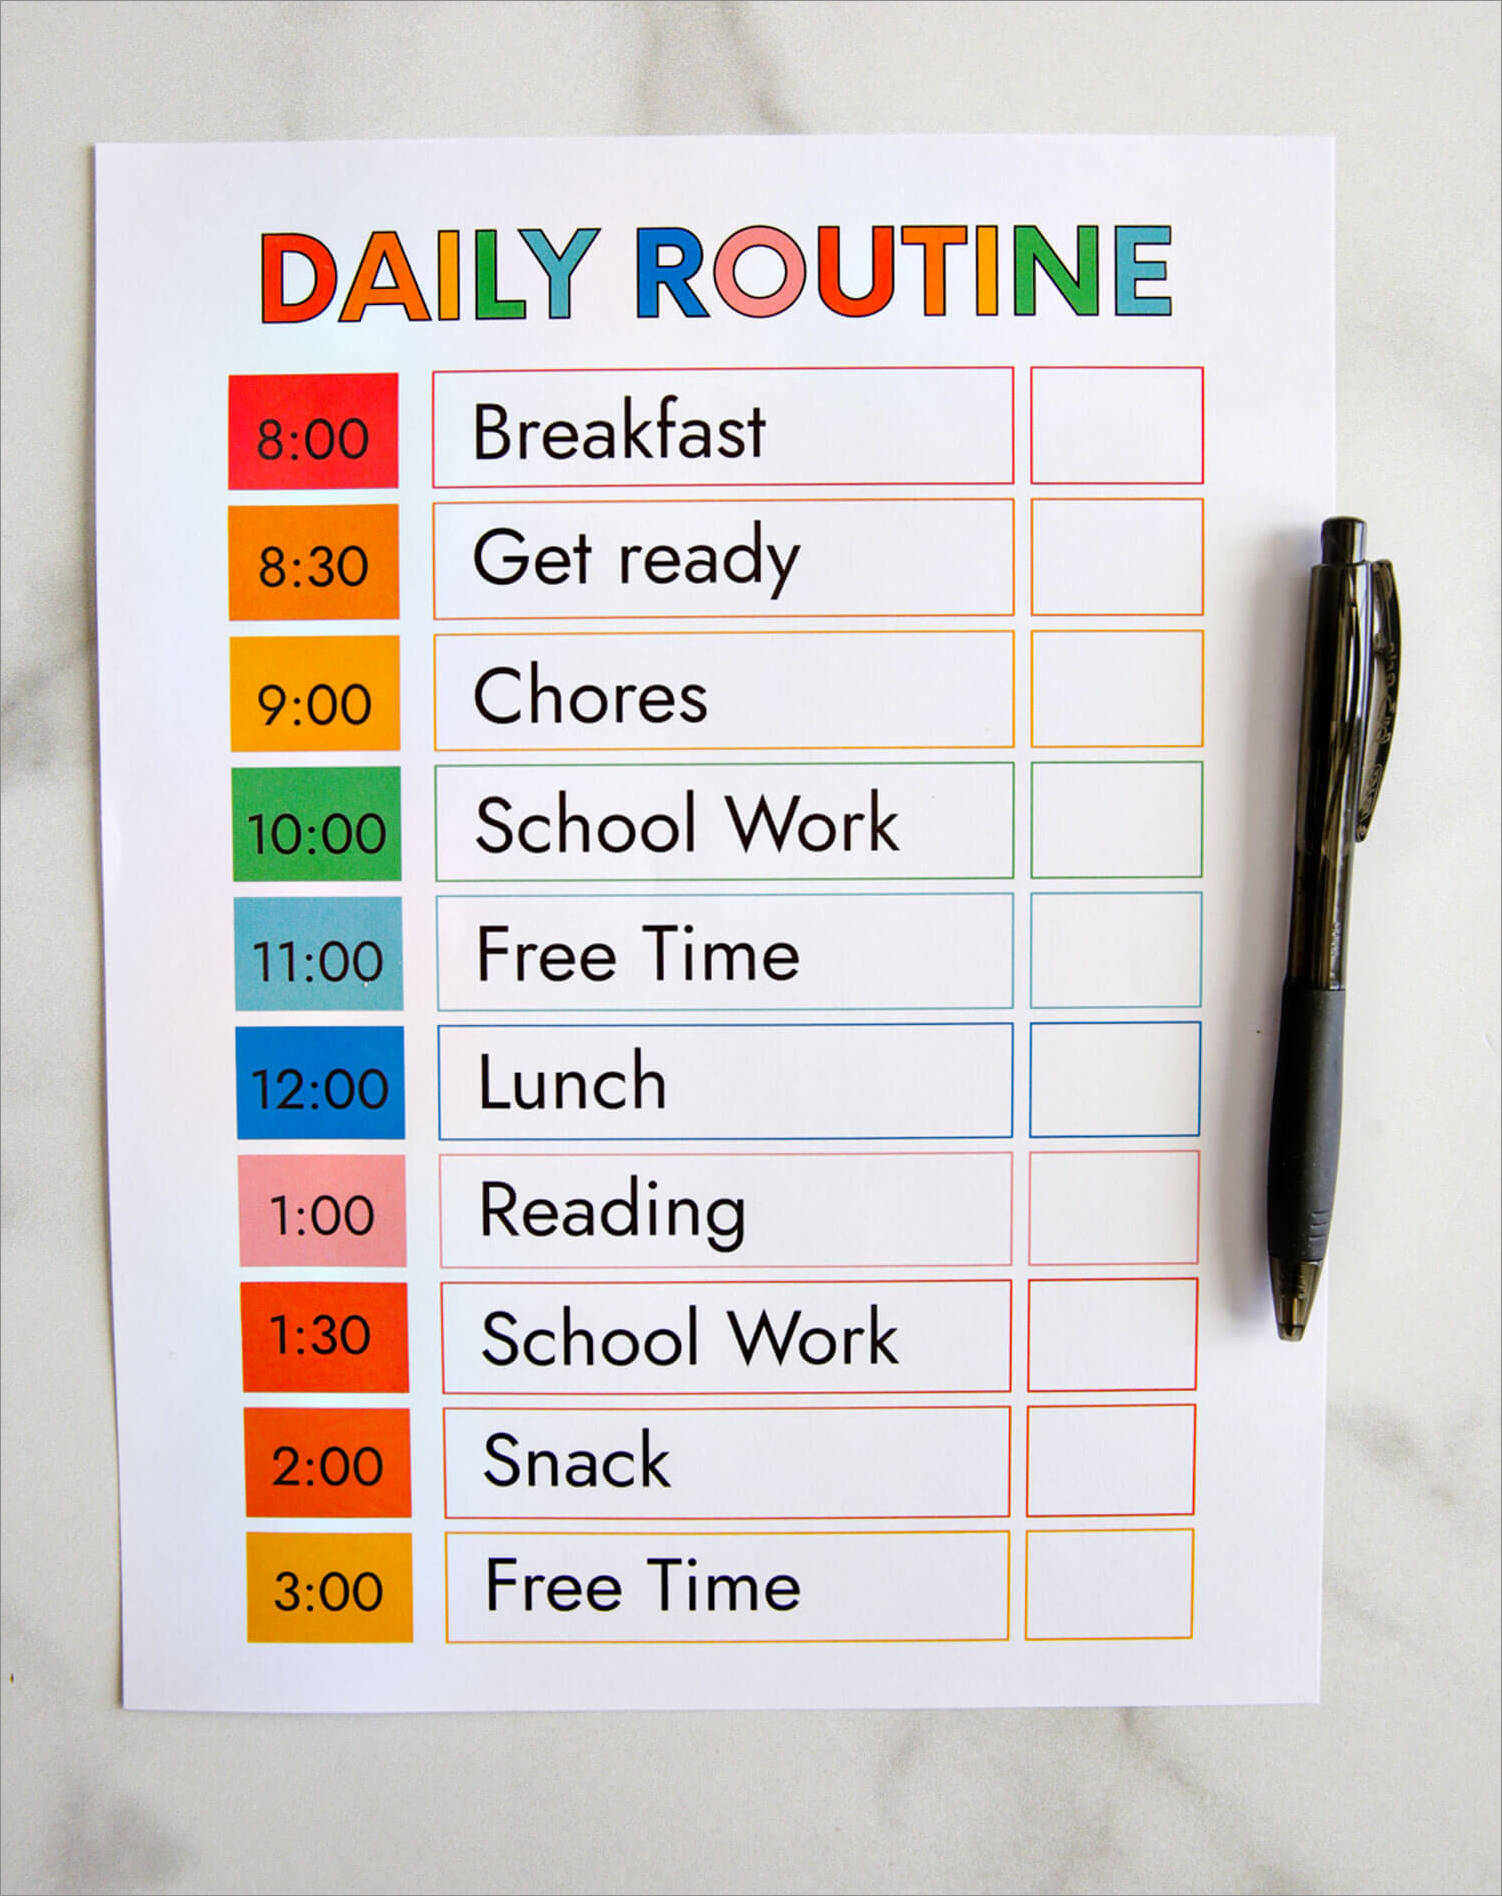 daily routine 24-hour schedule template